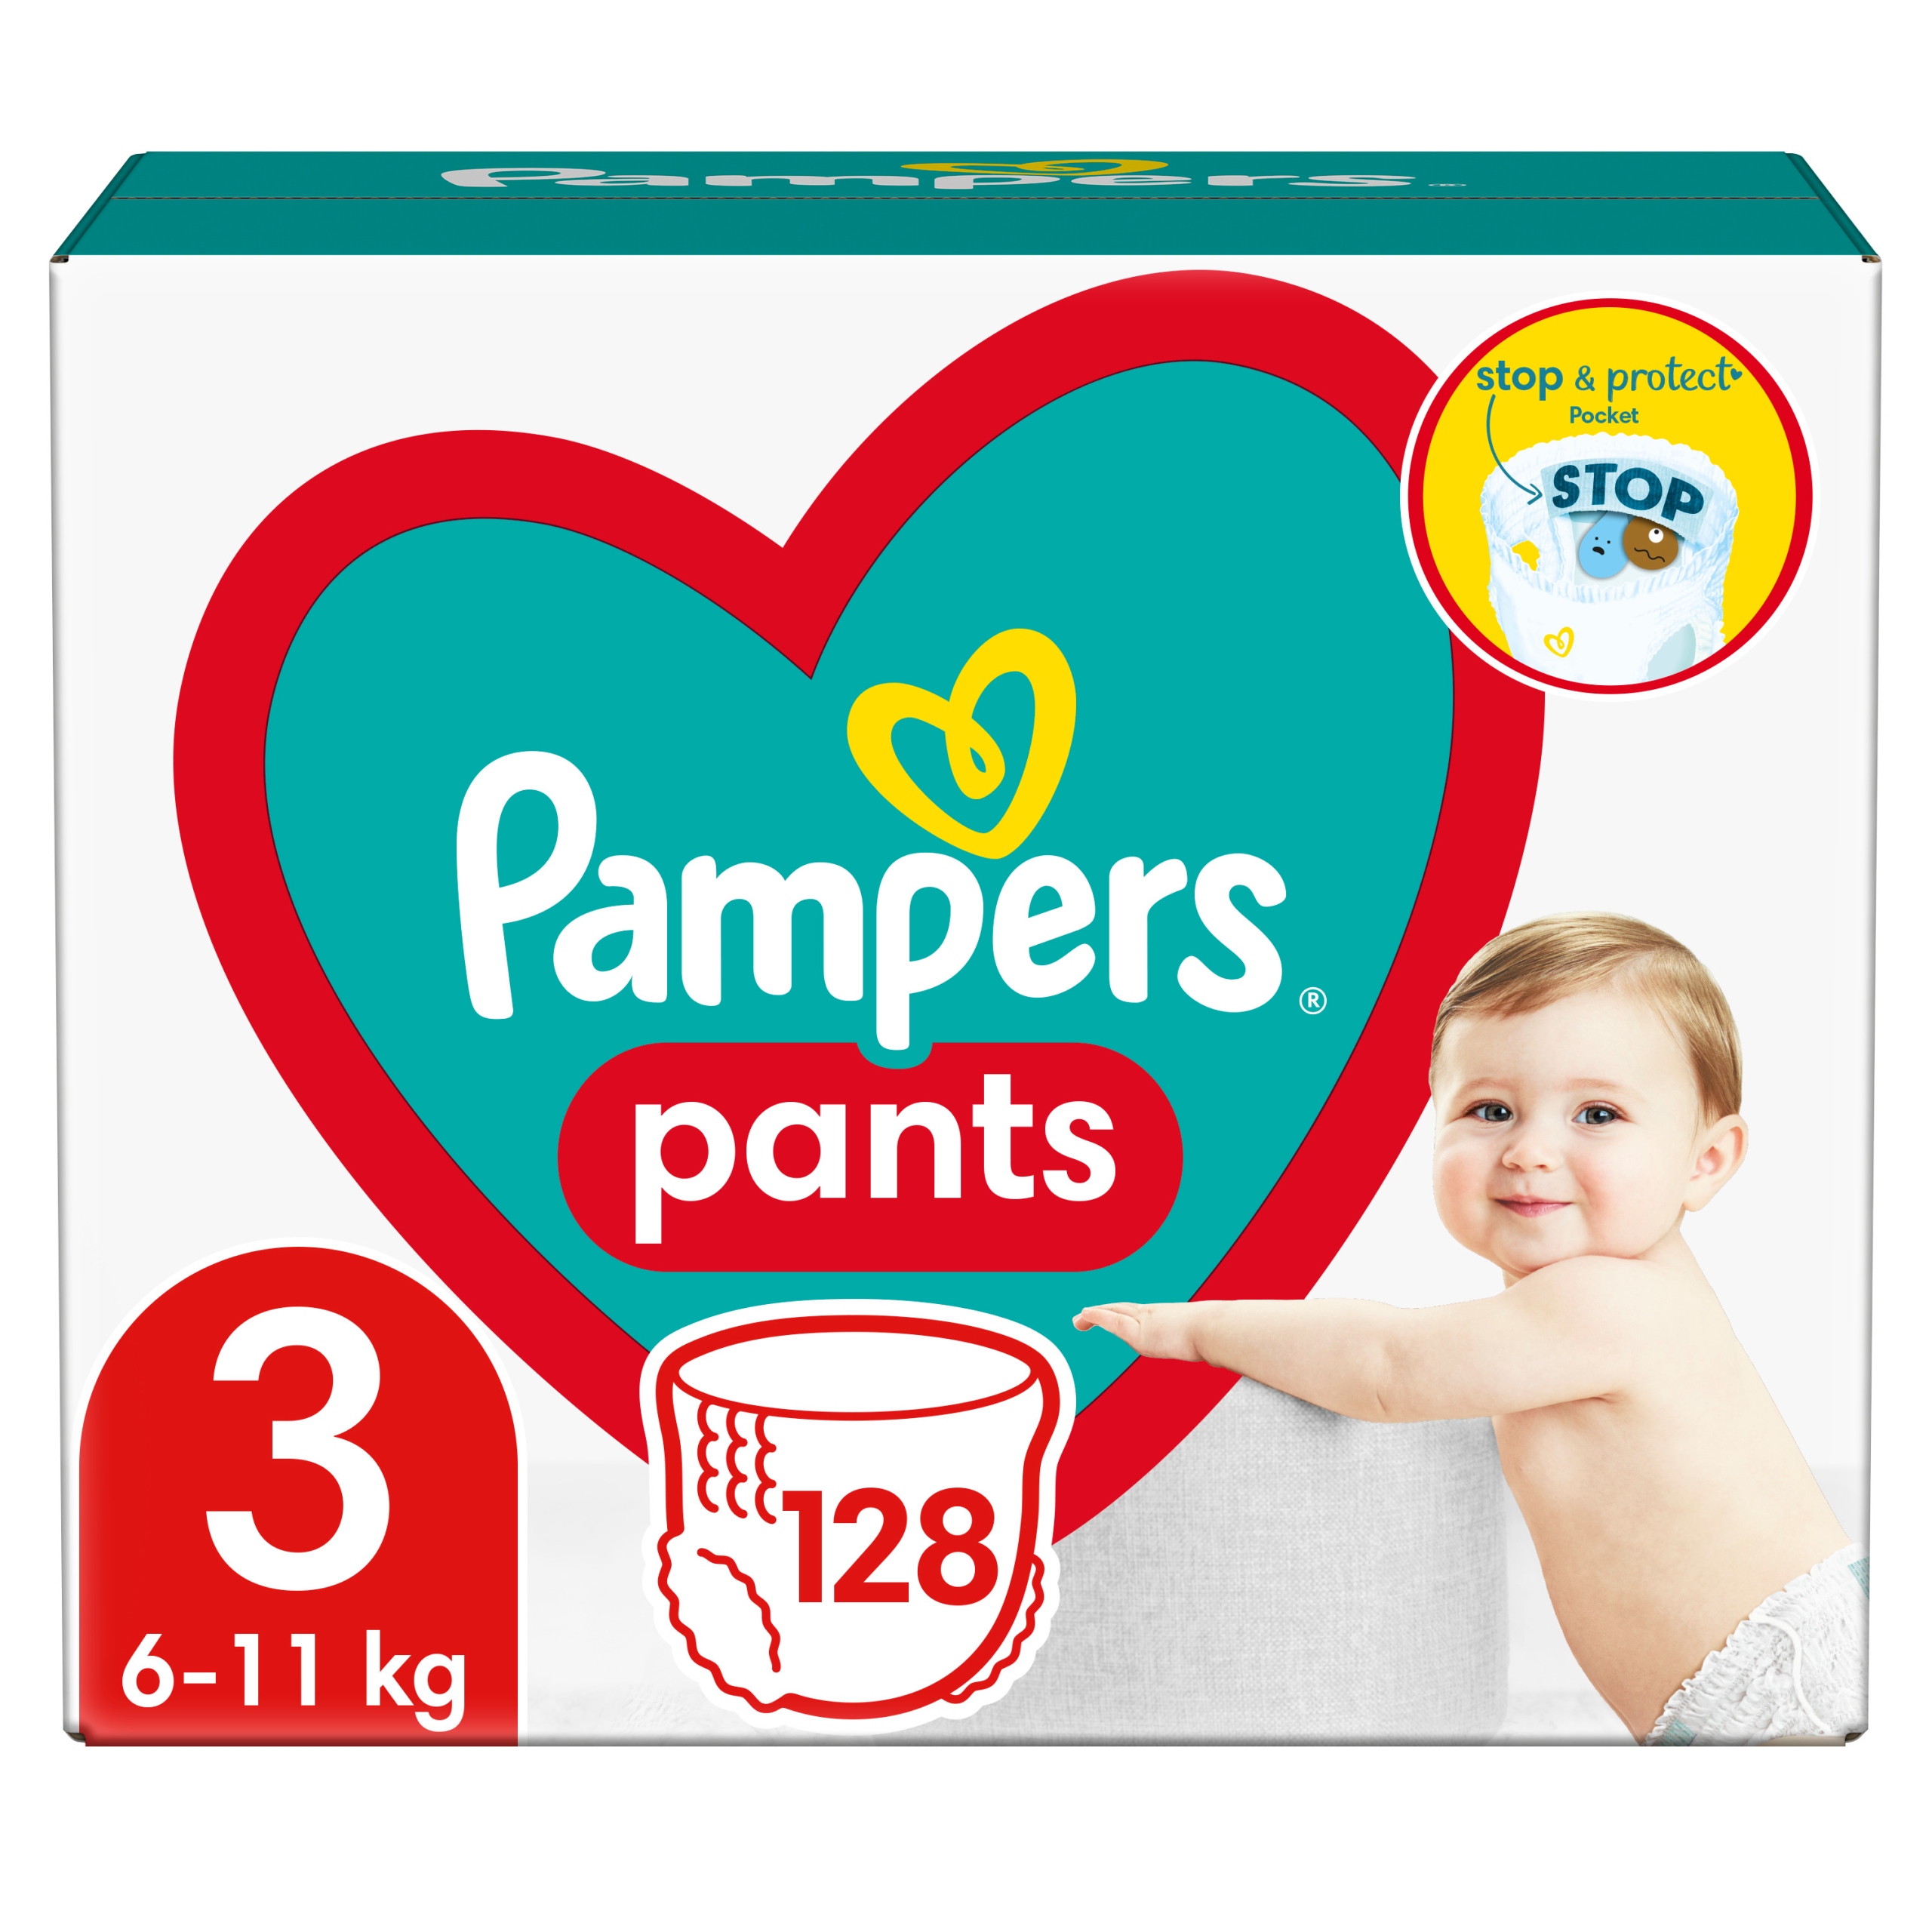 pampers premium care opic